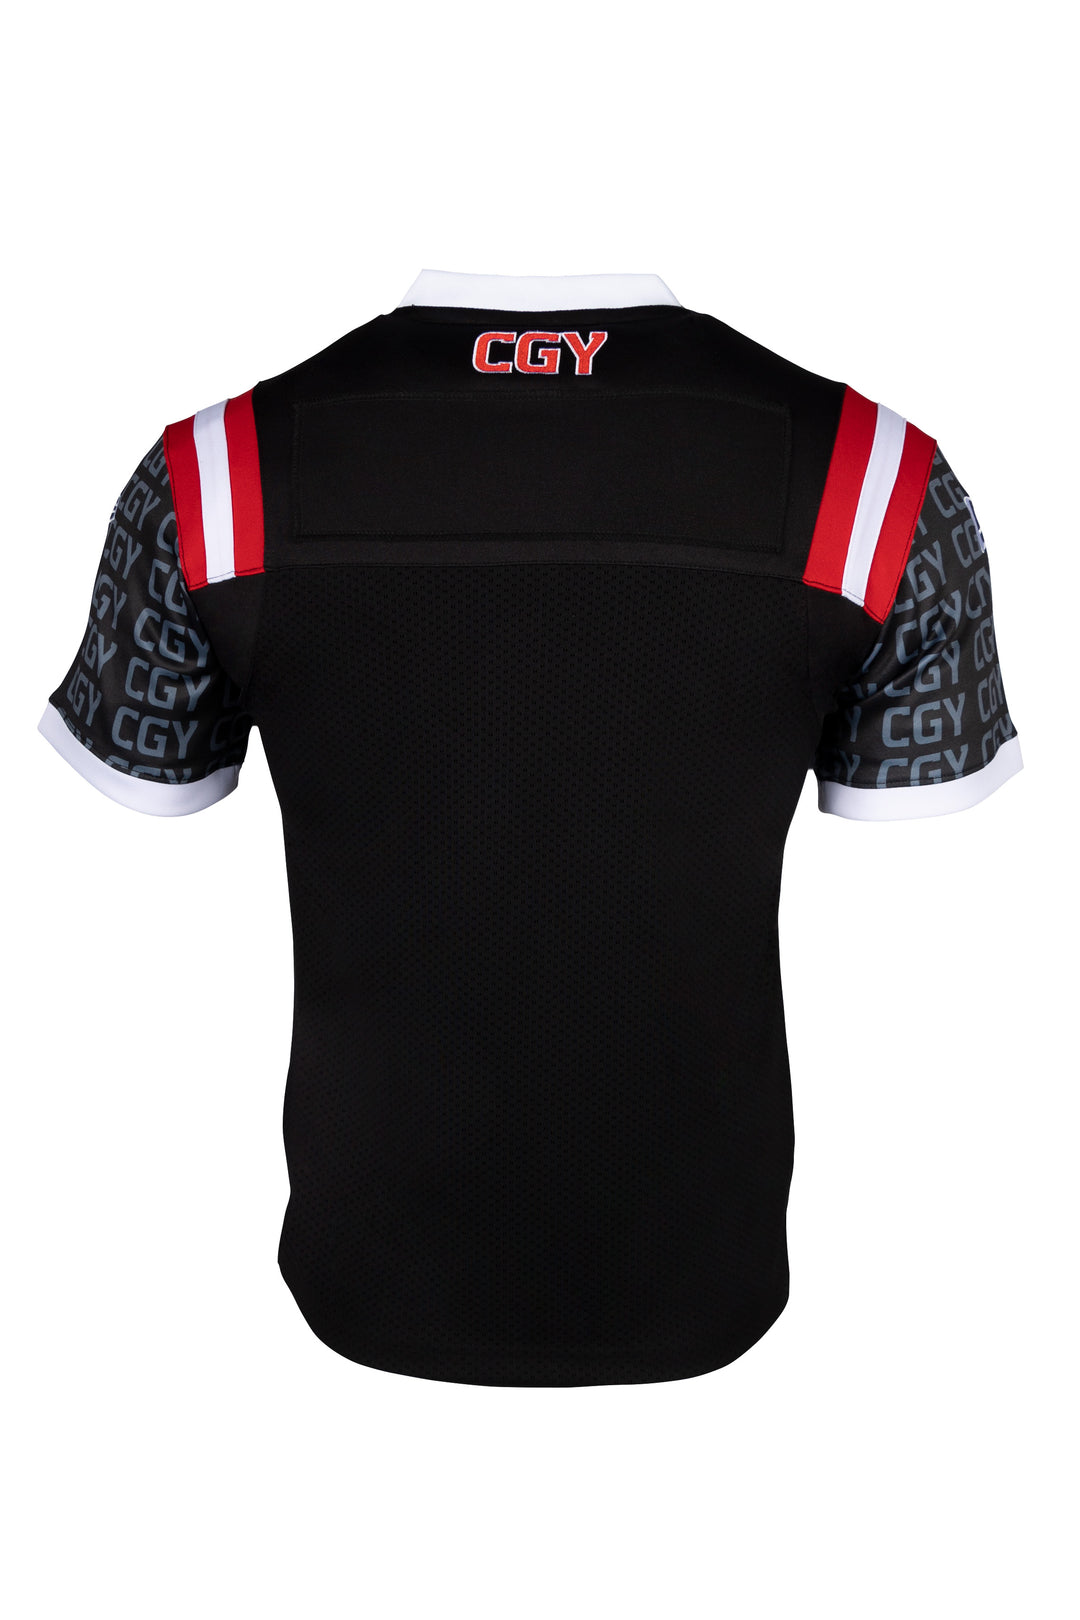 Stamps Youth New Era CGY 3rd Jersey